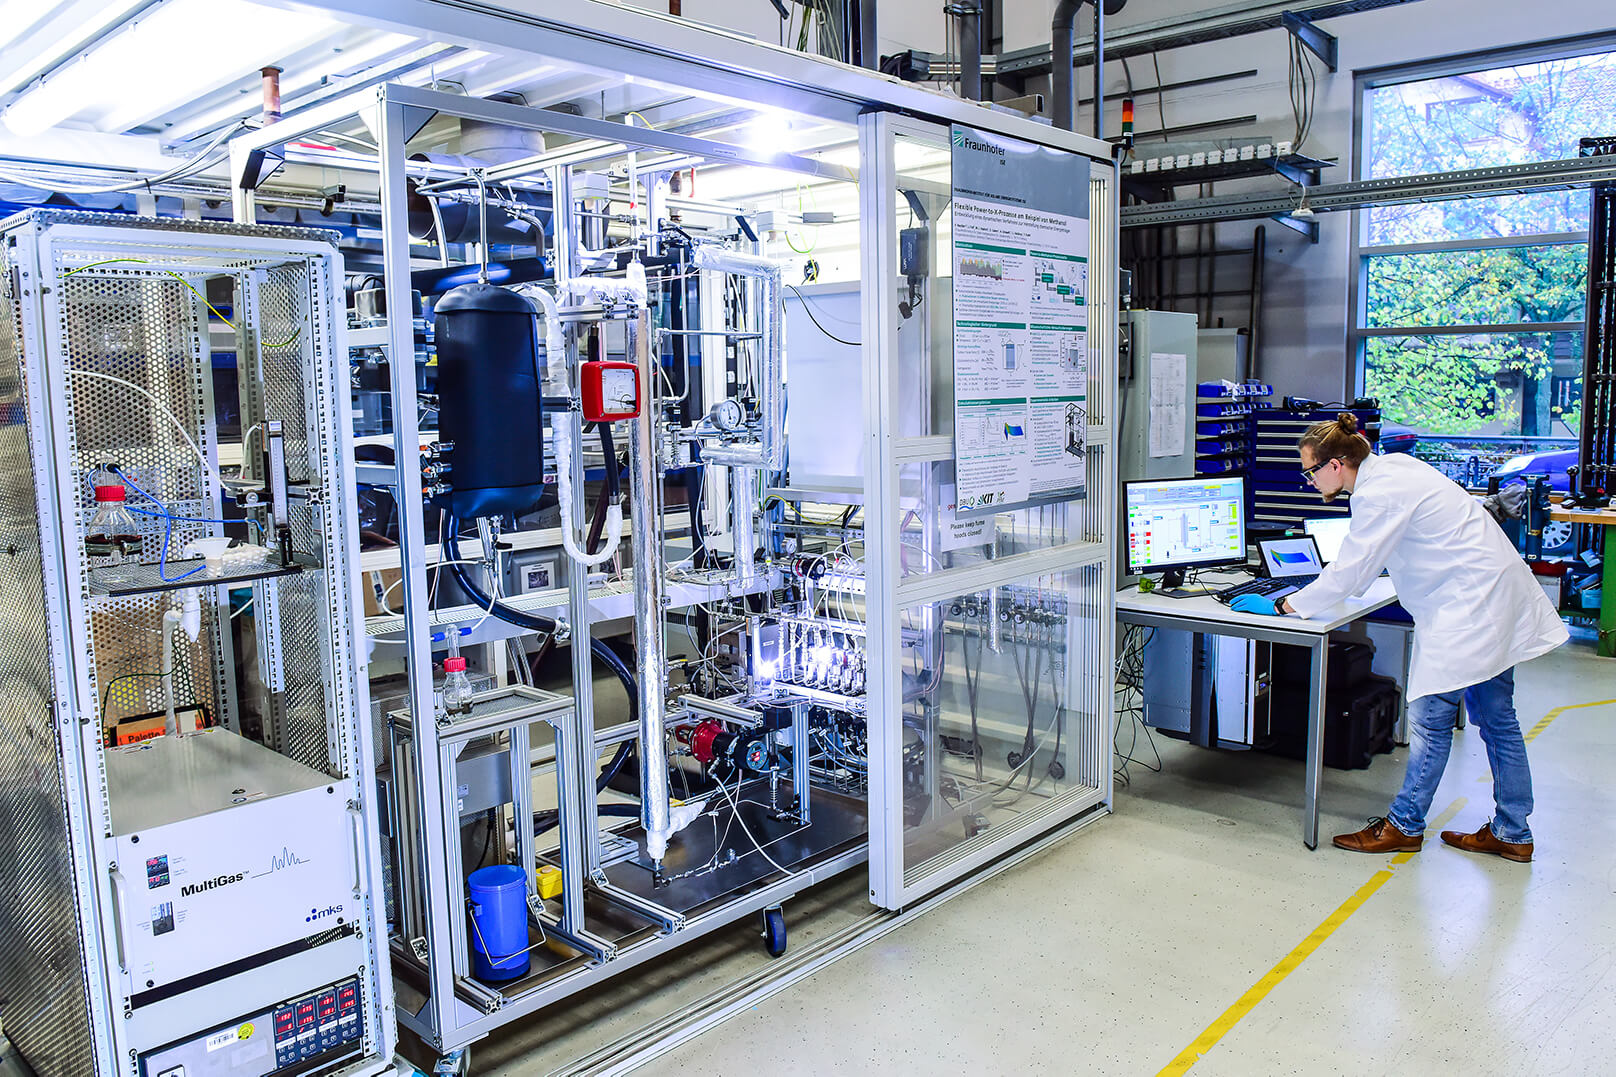 Mini methanol plant with simulation interface, located in the technical laboratory at Fraunhofer ISE